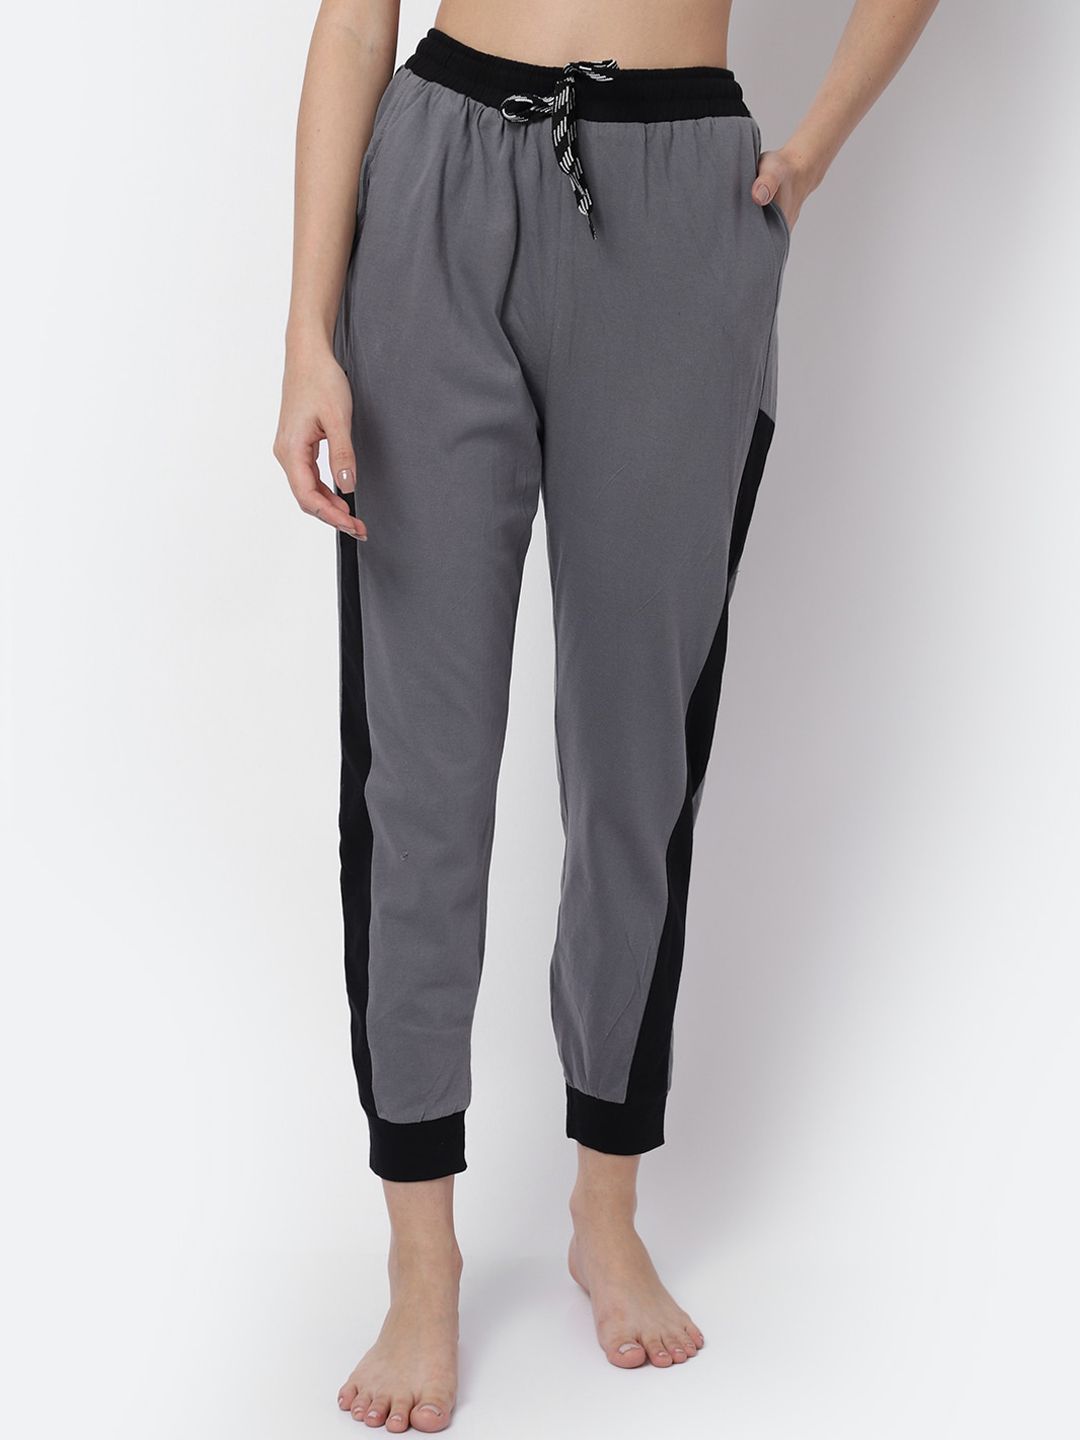 Claura Women Grey Solid Cotton Lounge Pants Price in India